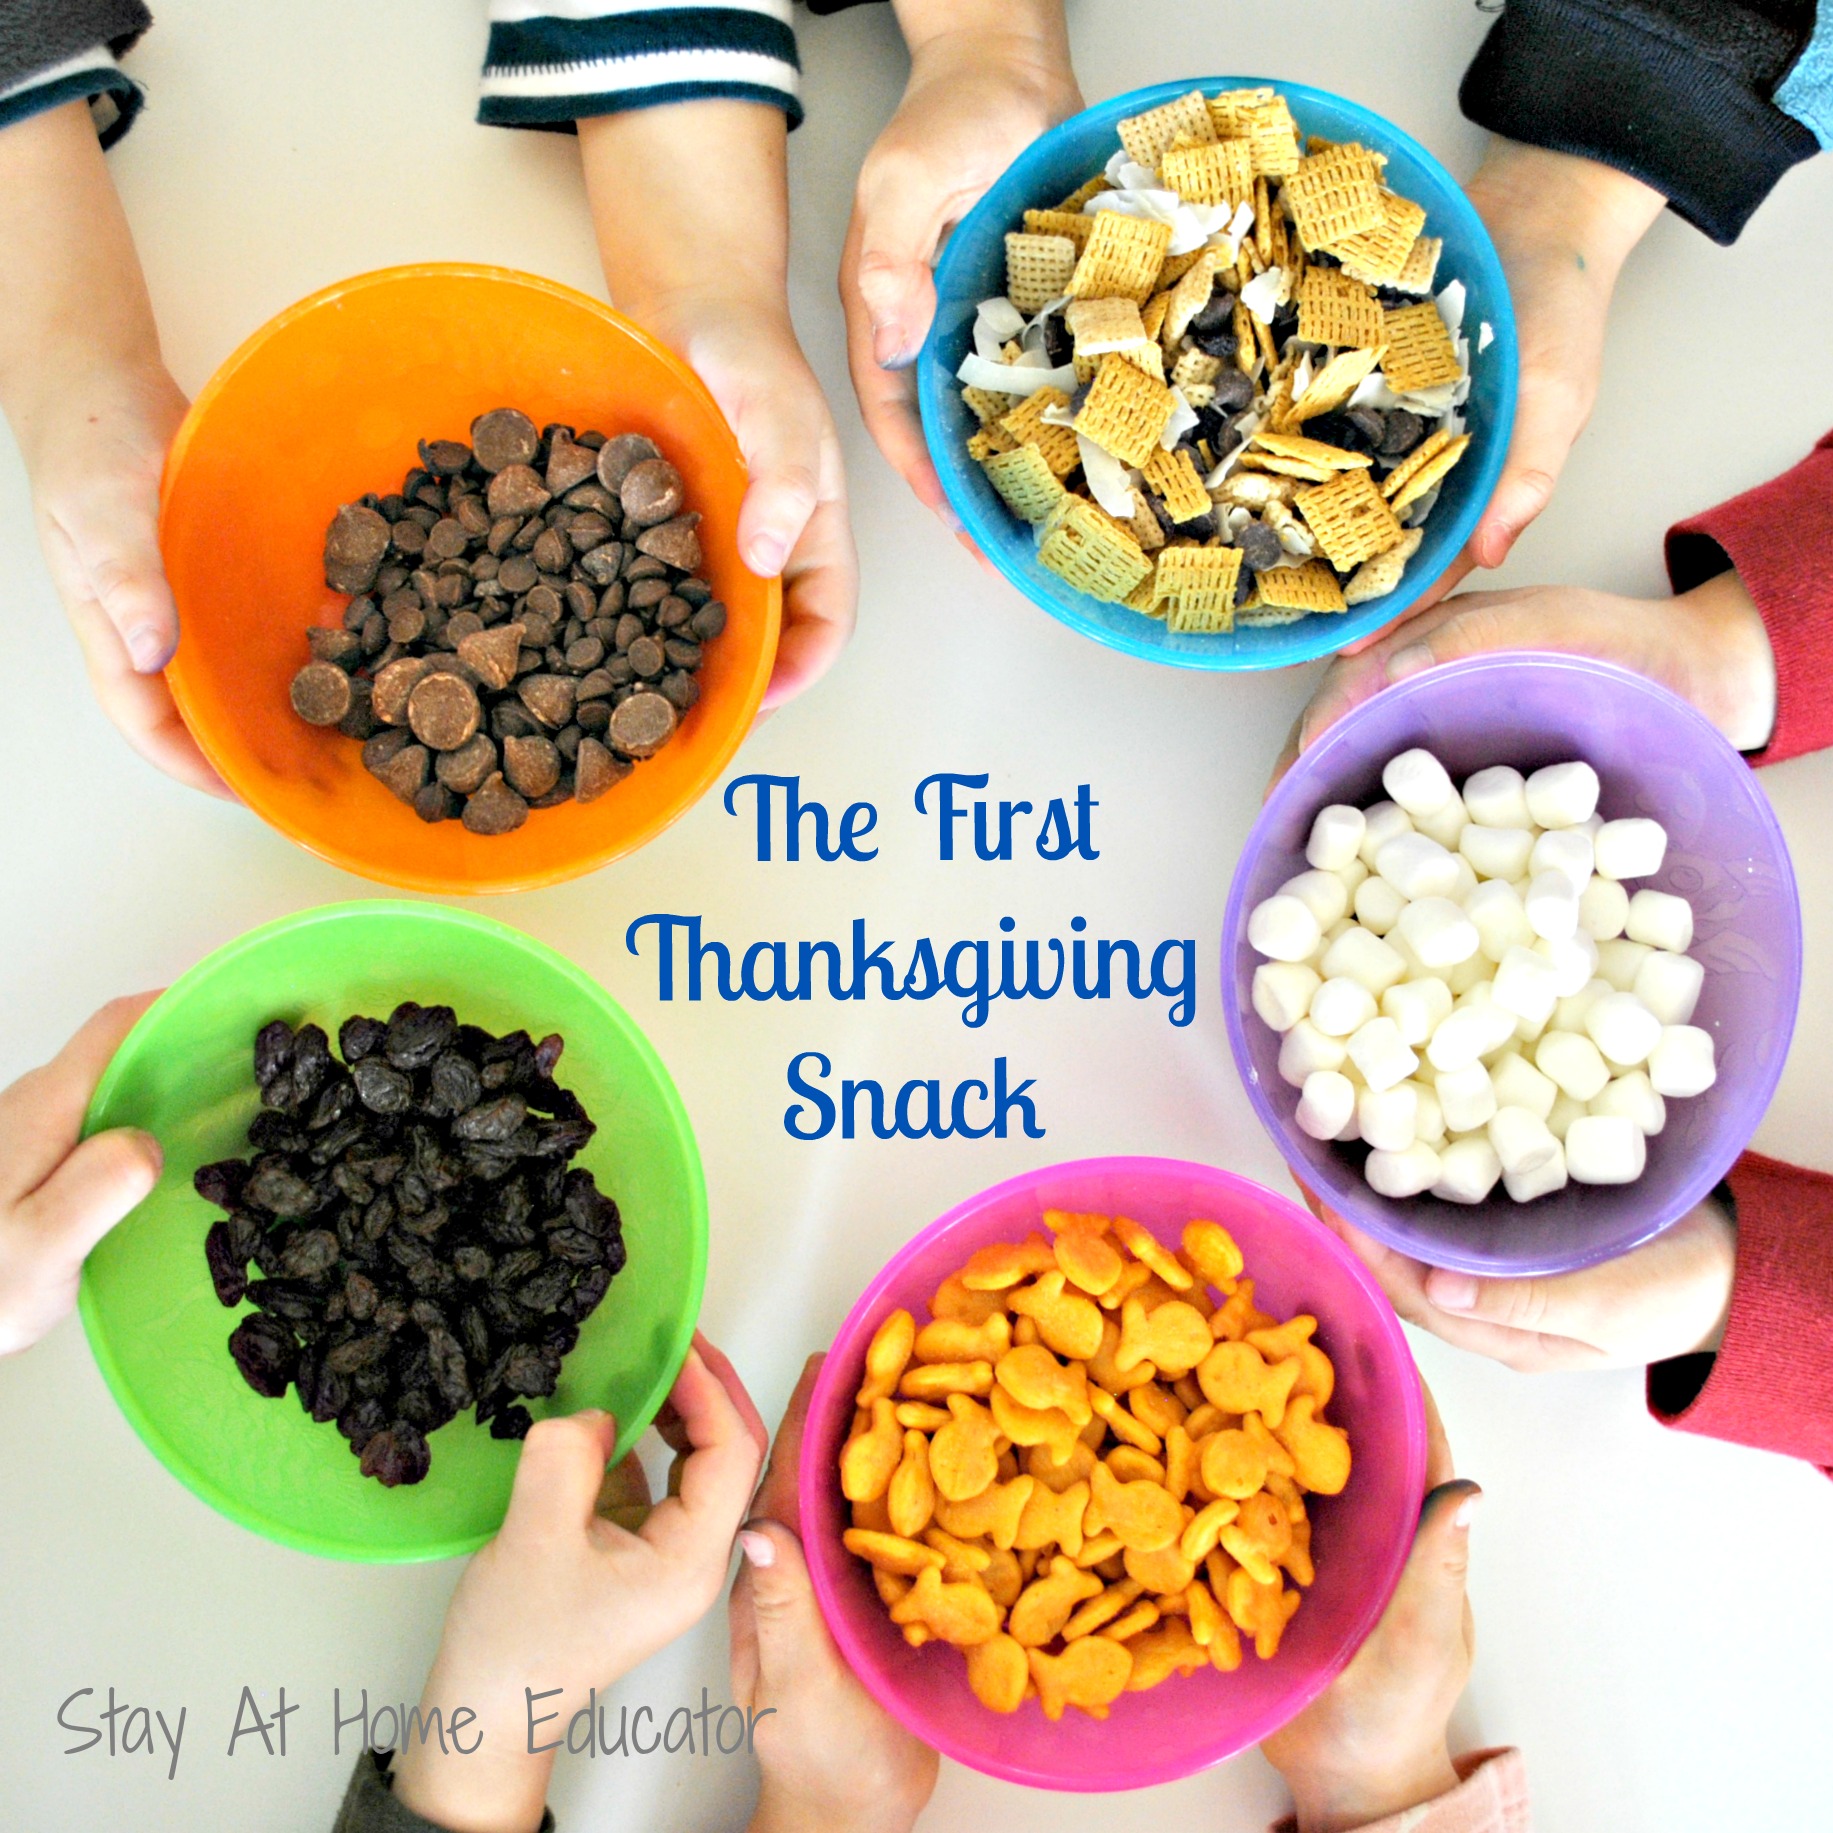 The first Thanksgiving snack, a preschool activity to celebrate - Stay At Home Educator